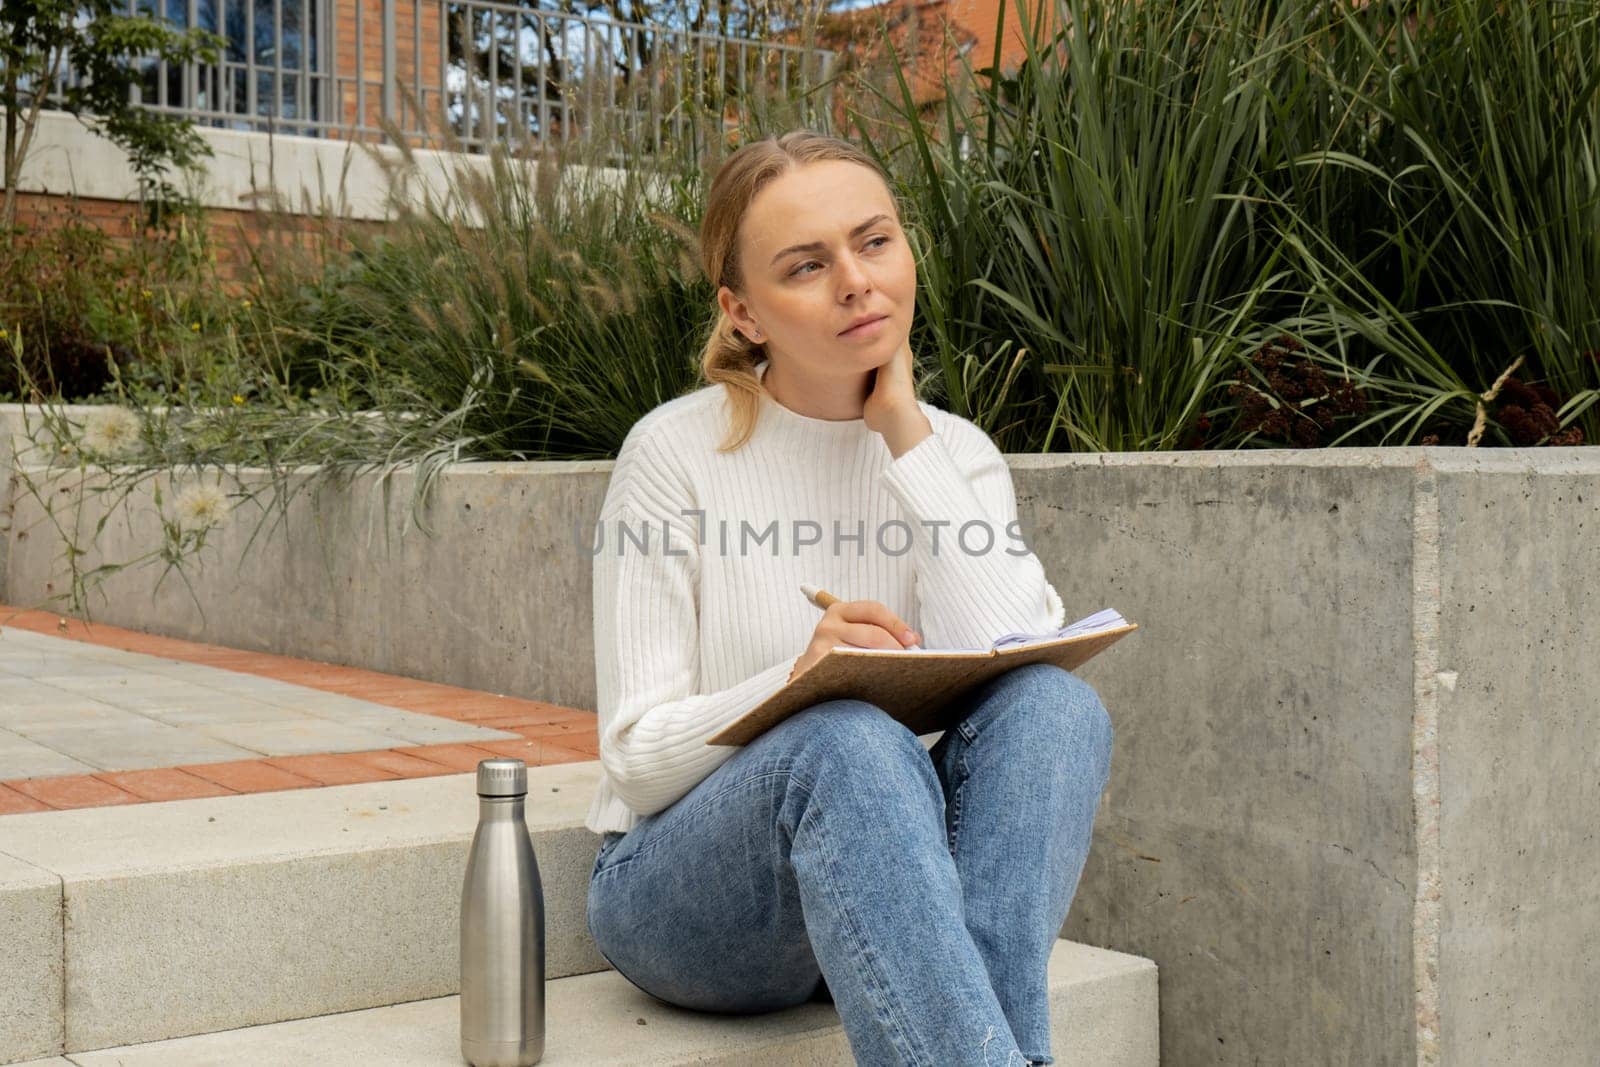 Young student study with notebook in park. Drinking water, hot tea or coffee from reusable metal bottle. Writing gratitude journal self reflection self discovery Outdoors warm autumn seashore.